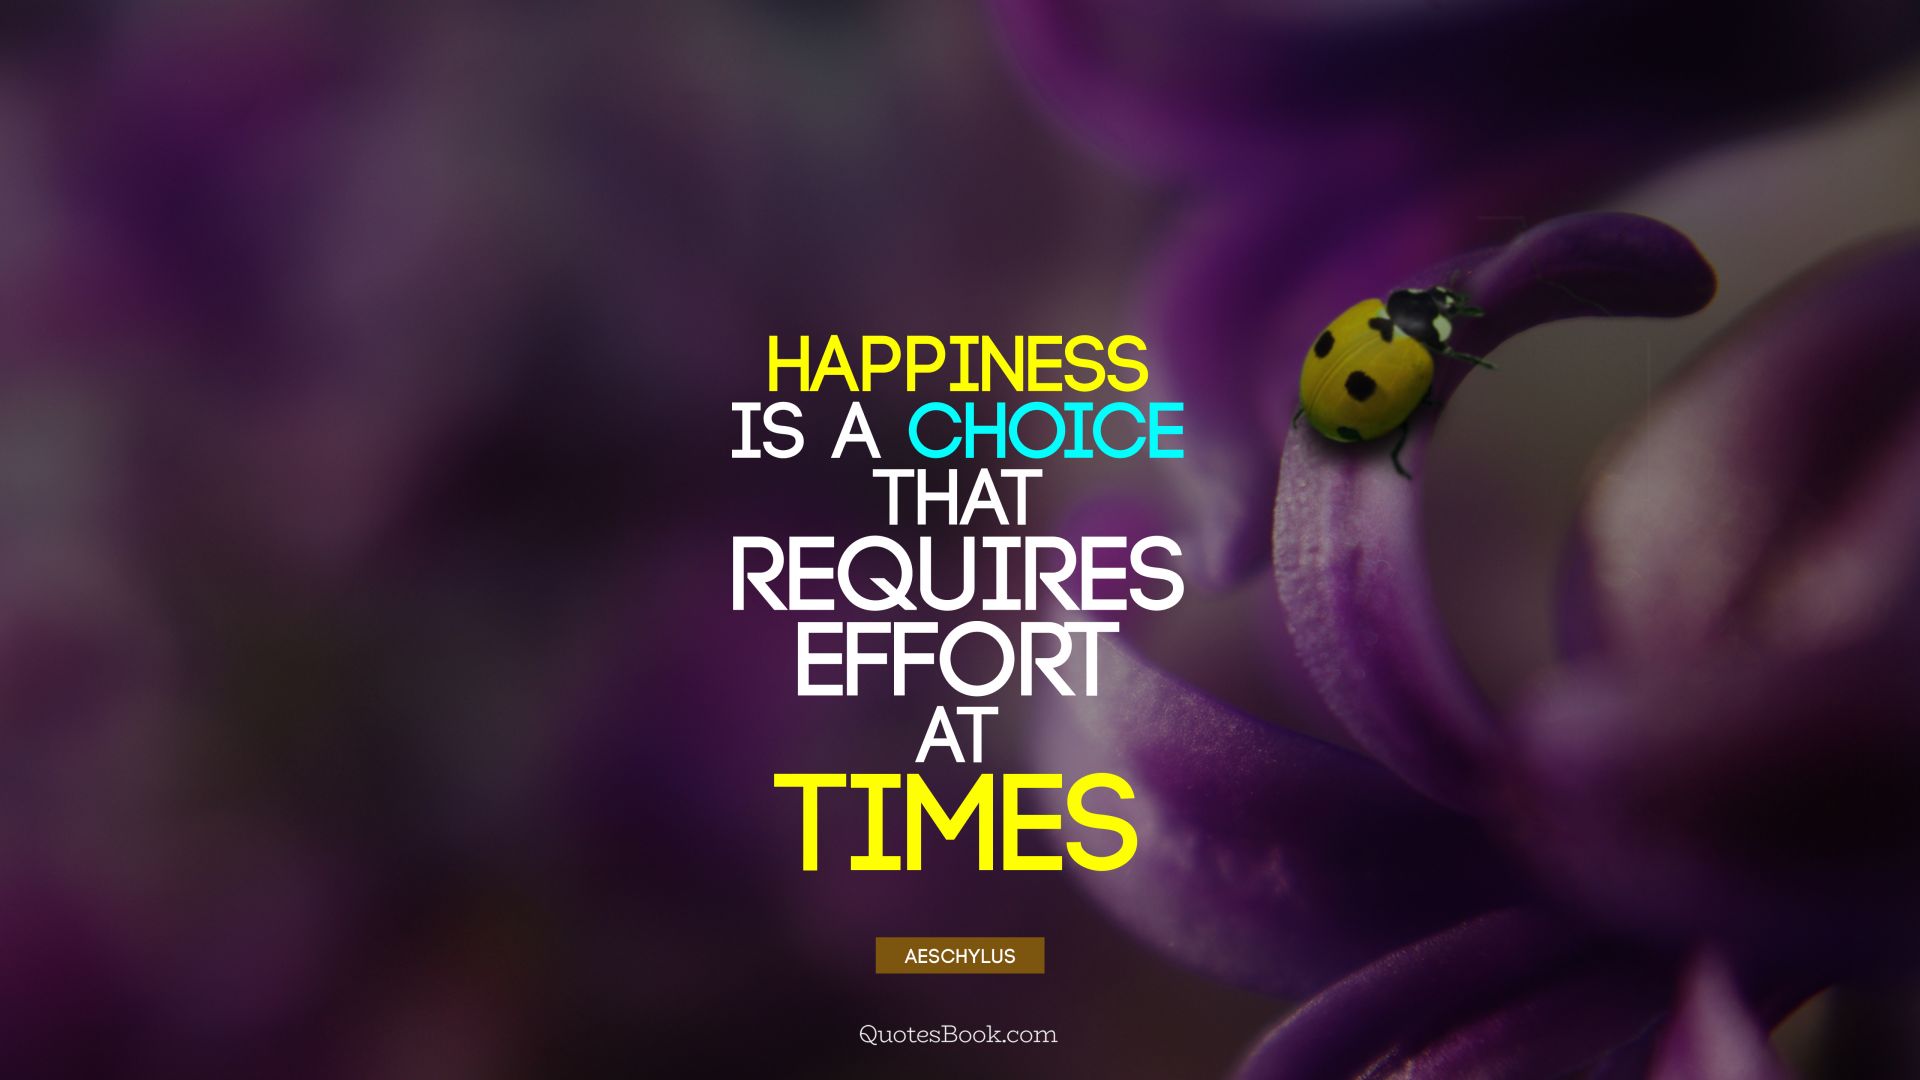 Happiness is a choice that requires effort at times. - Quote by Aeschylus